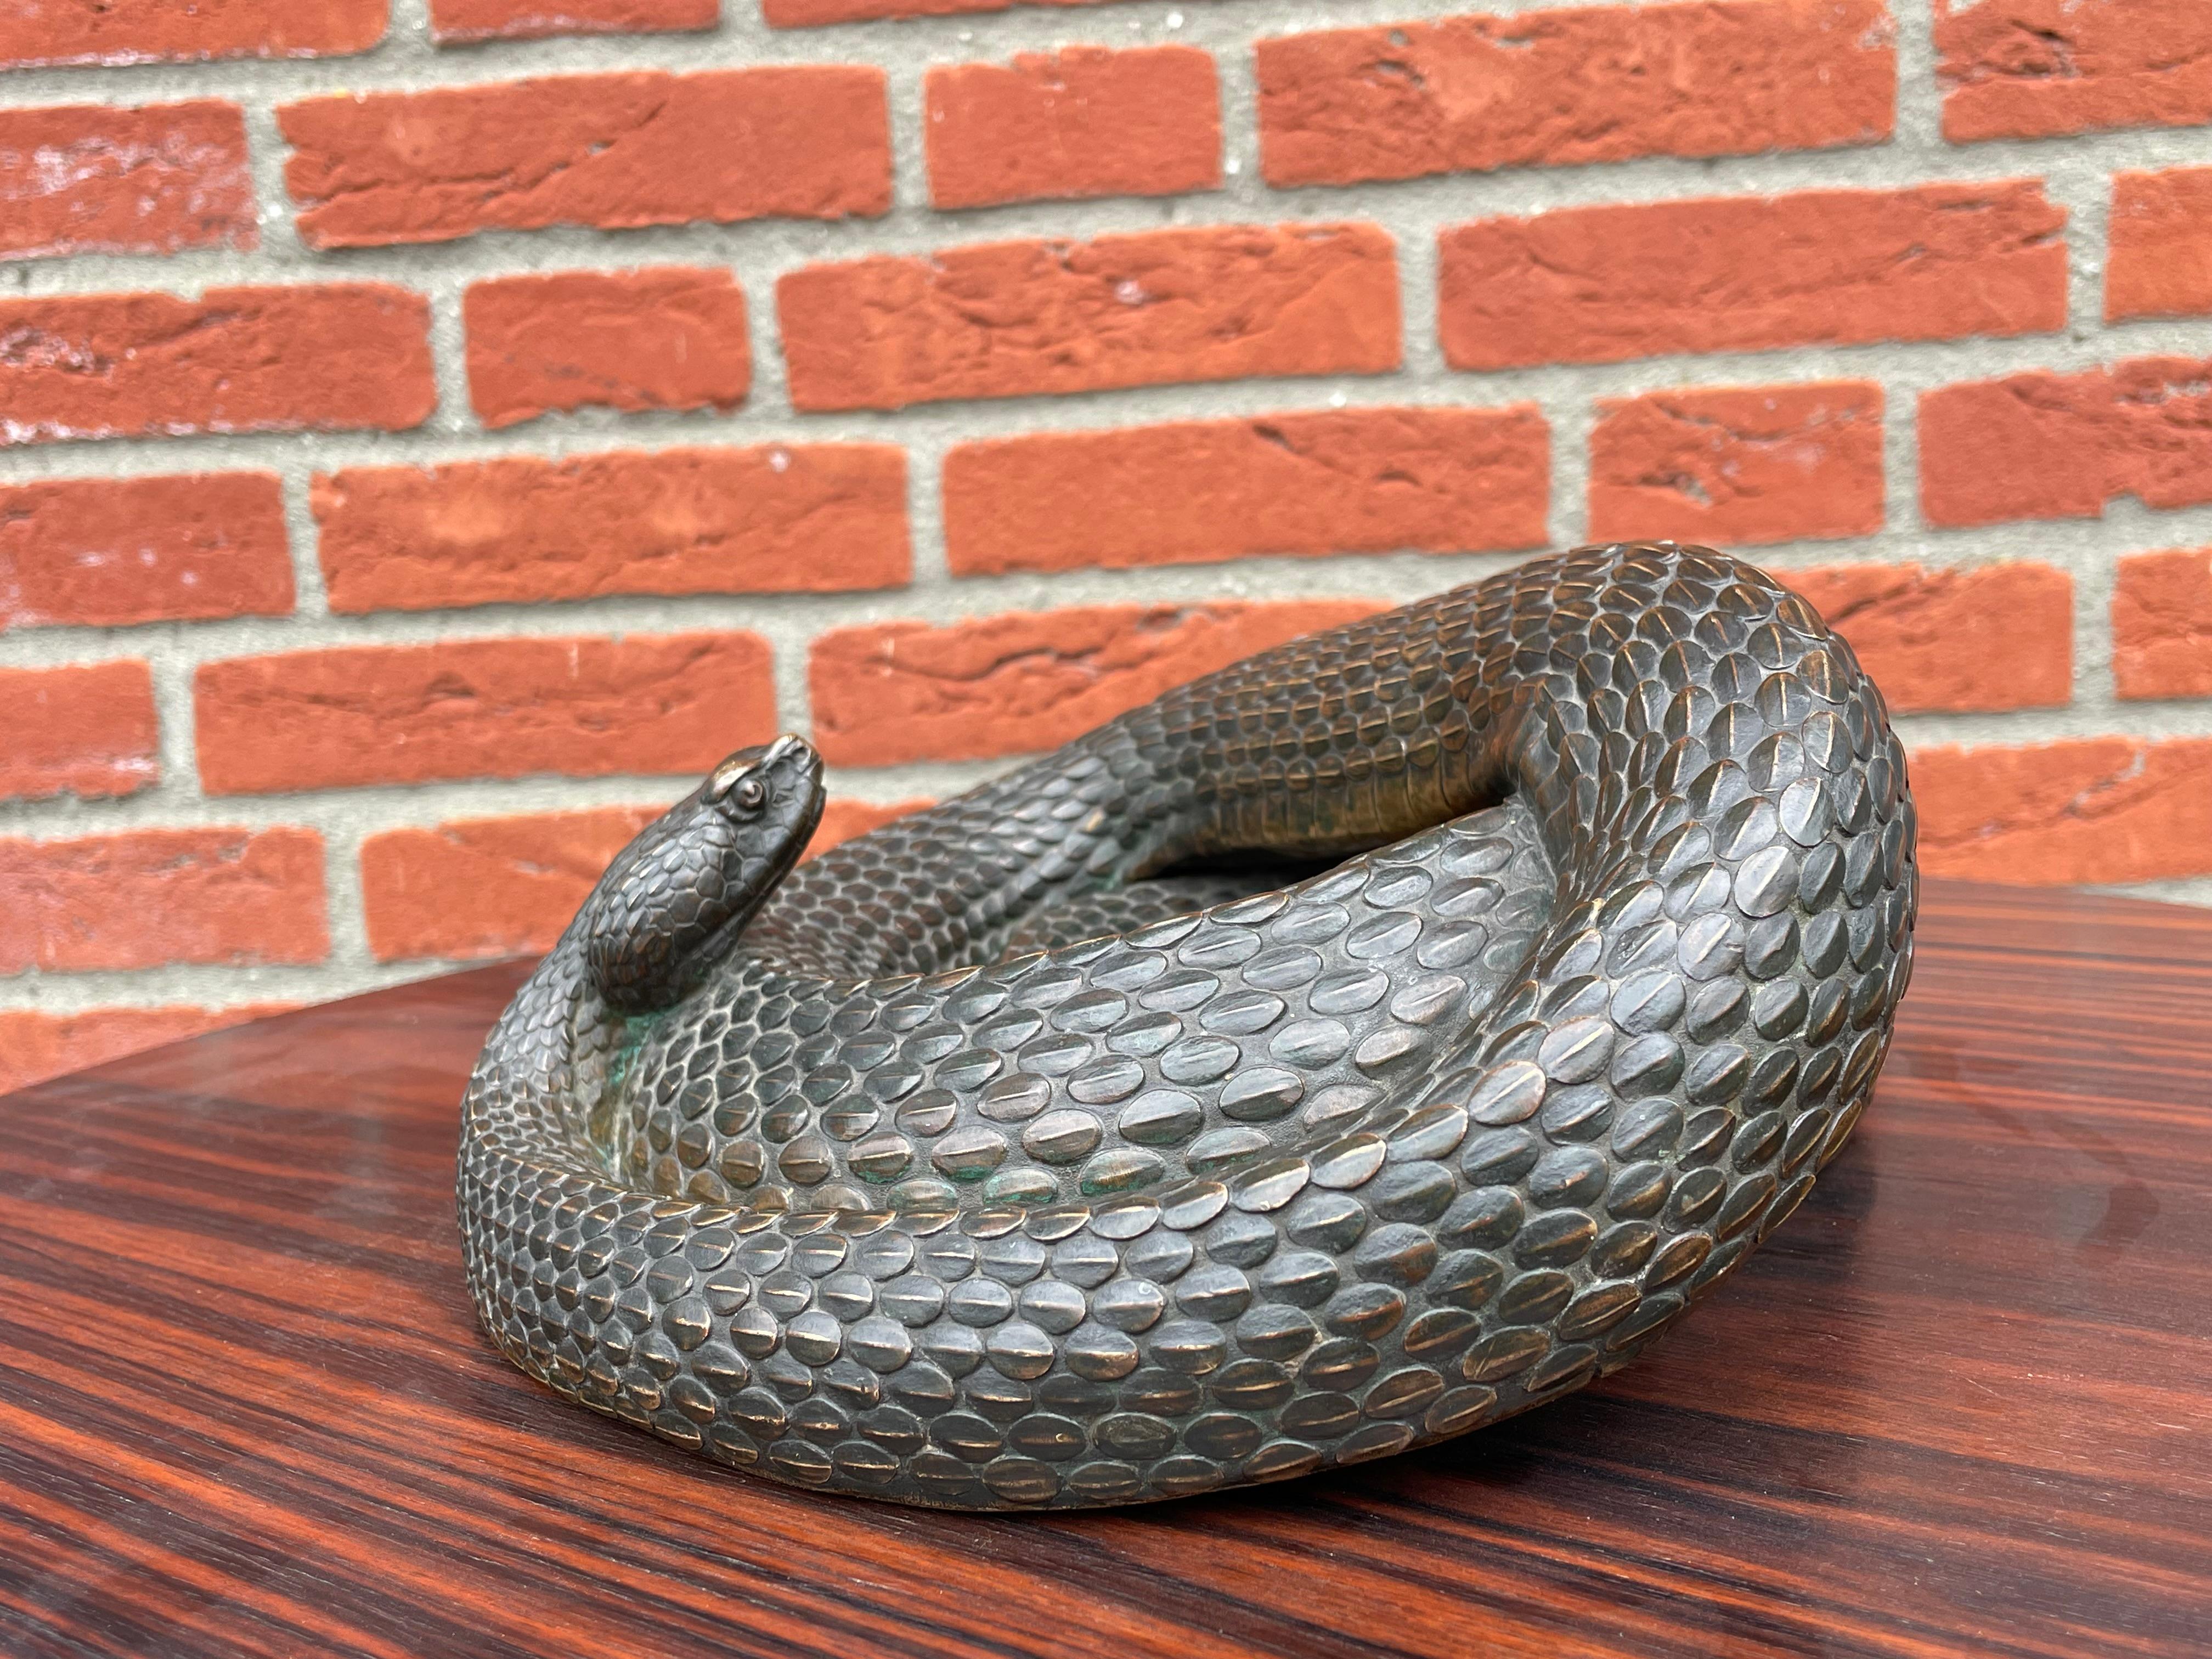 World class, aesthetically marvelous and extremely rare rattle snake culpture.

Over the decades we have sold some really good antique bronzes, but we feel that this diamondback rattler could very well be the rarest, the most detailed and the best